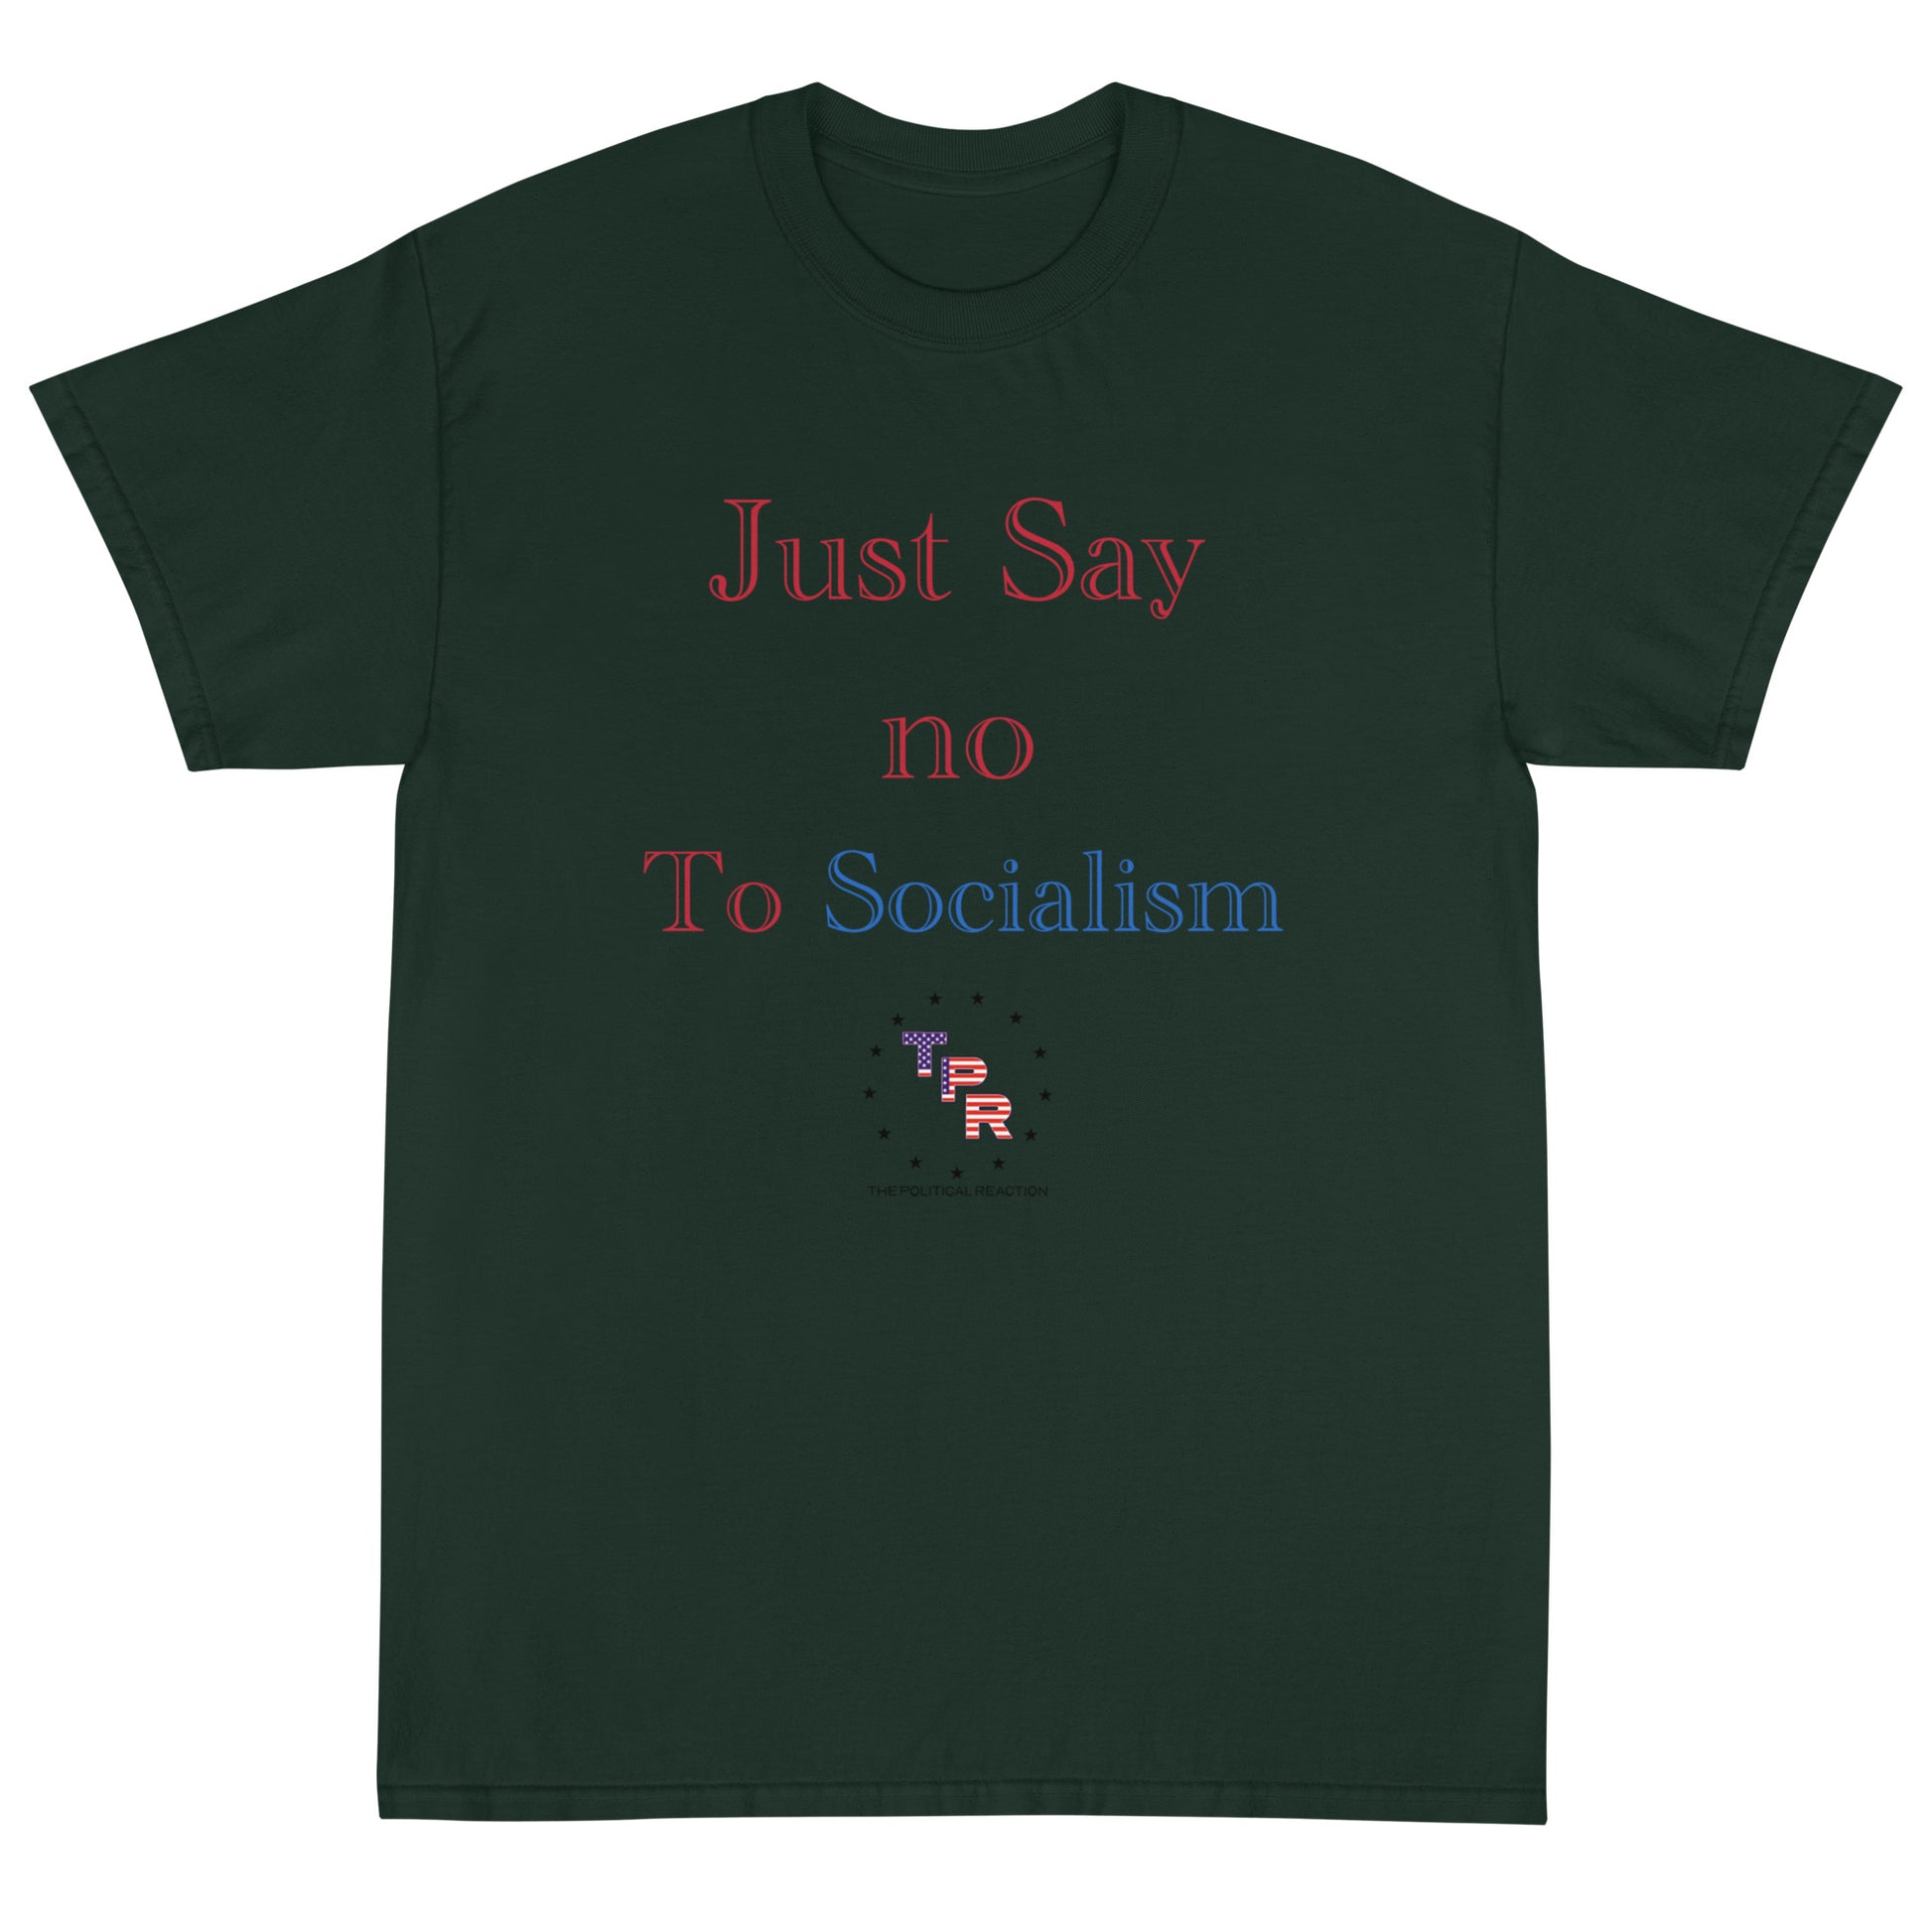 Just-say-no-to-socialism-t-shirt-Forest-green